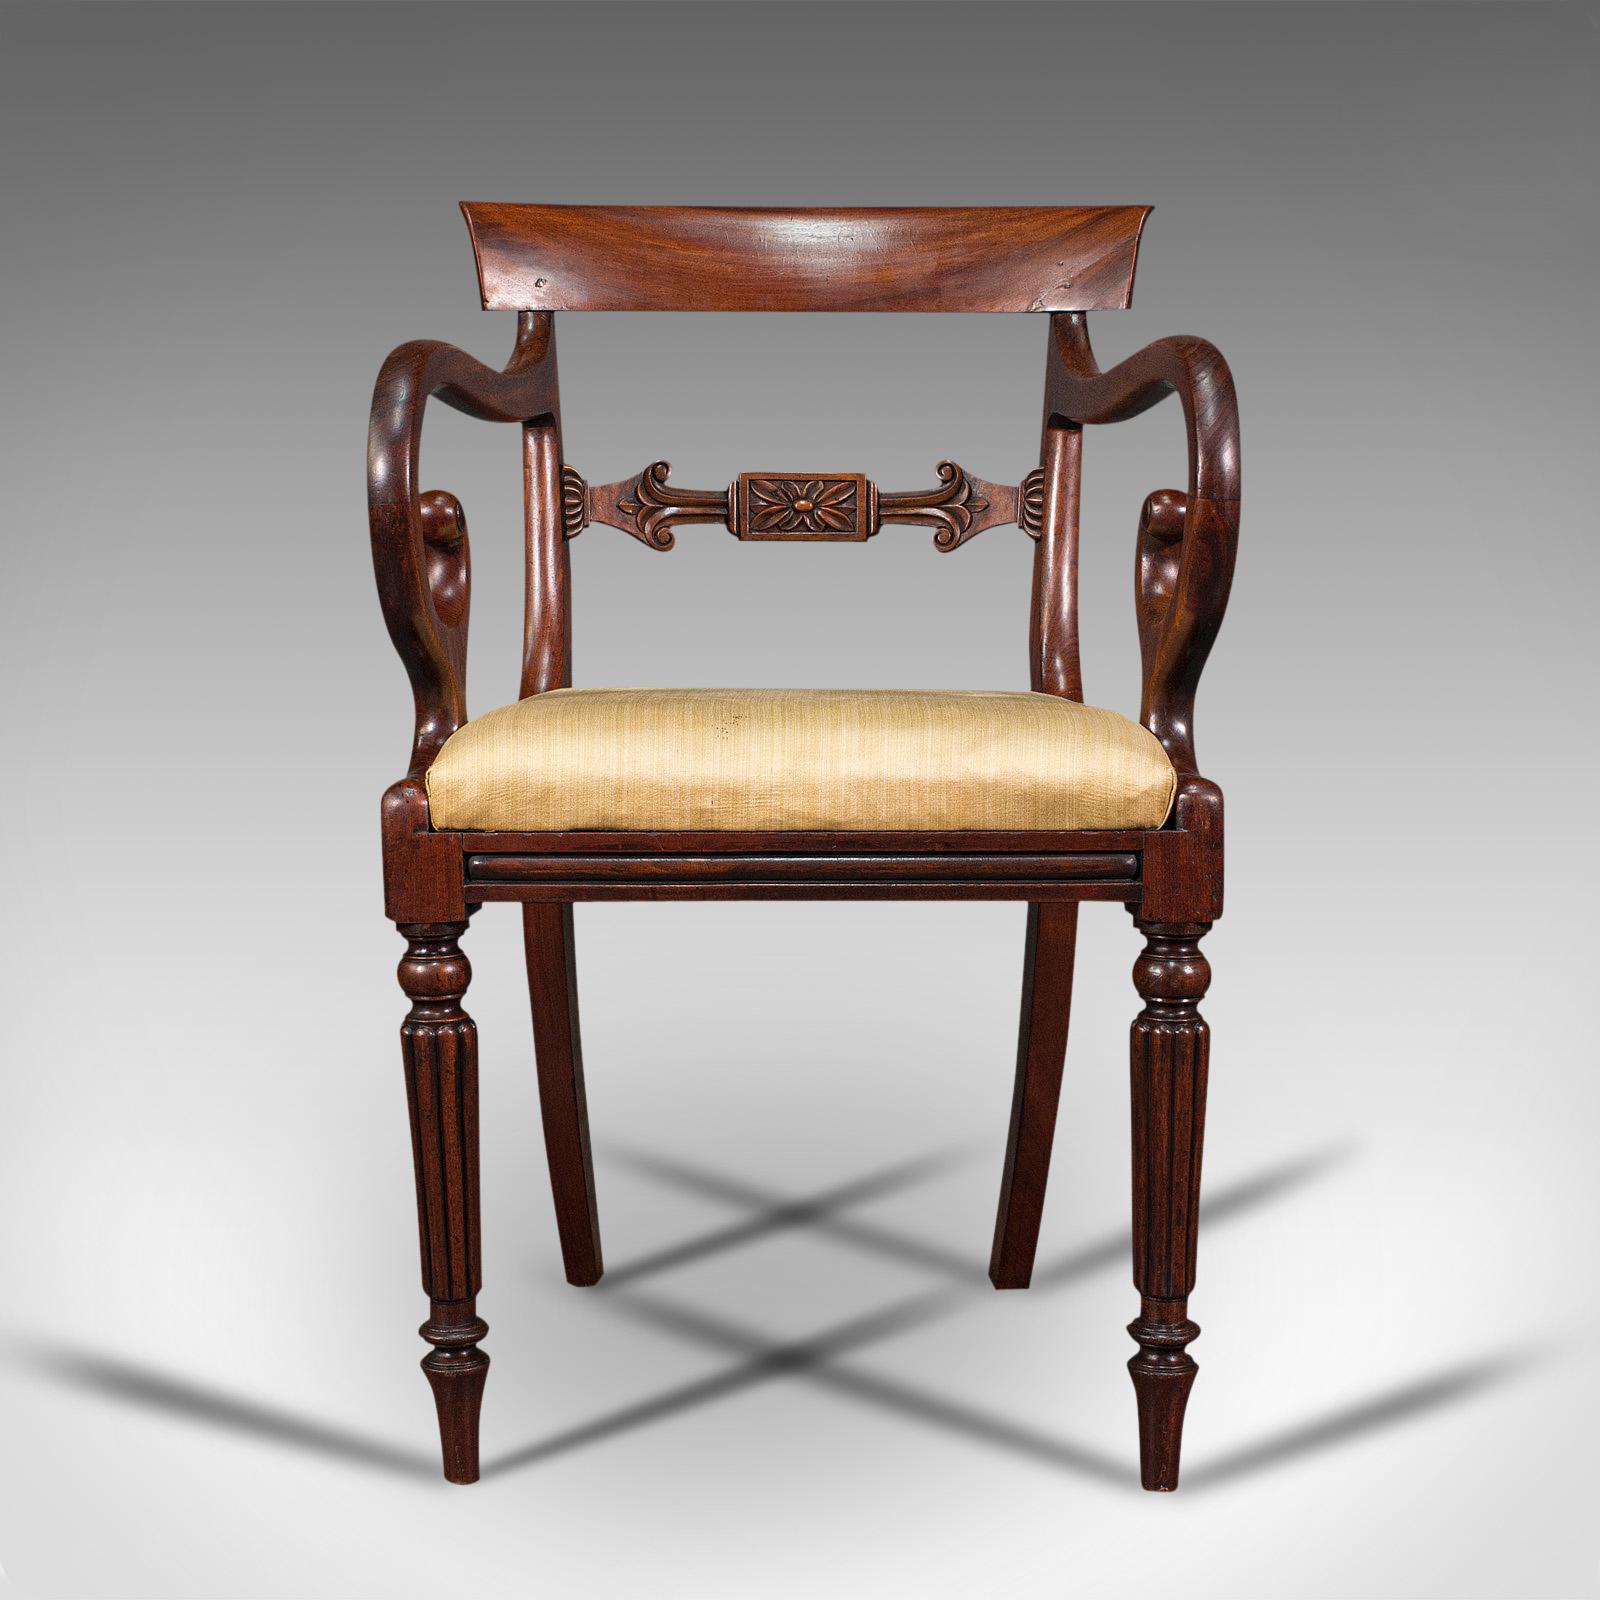 This is an antique elbow chair. An English, mahogany carver with drop-in seat, dating to the Regency period, circa 1820.

Serpentine elegance as to be expected from the Regency period
Displays a desirable aged patina and in good order
Delightful